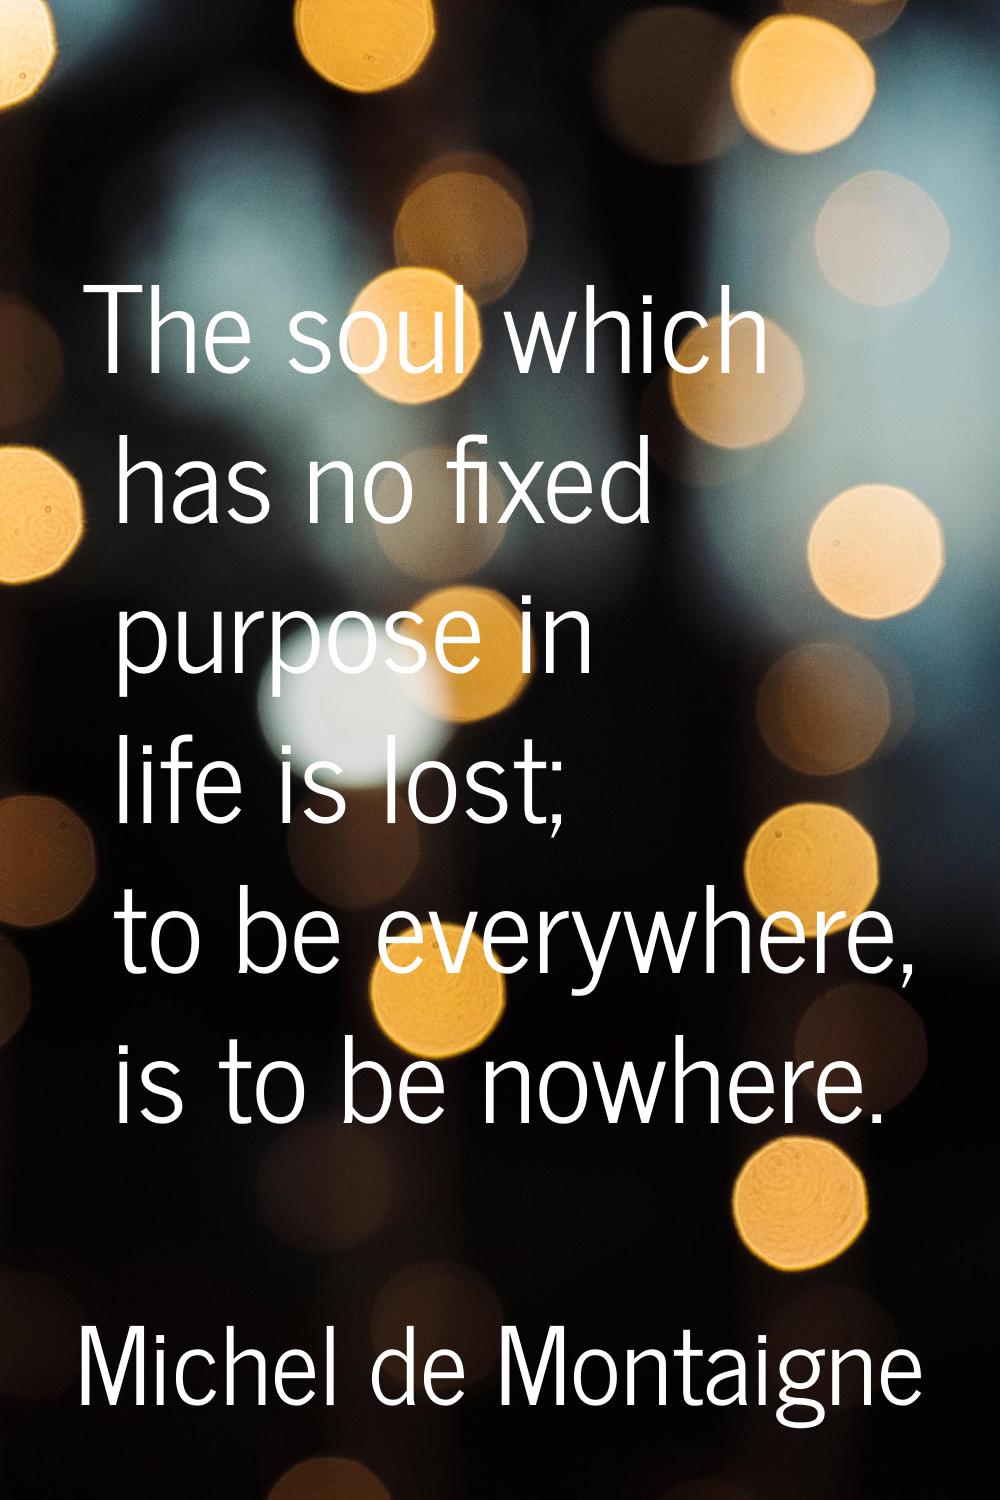 The soul which has no fixed purpose in life is lost; to be everywhere, is to be nowhere.